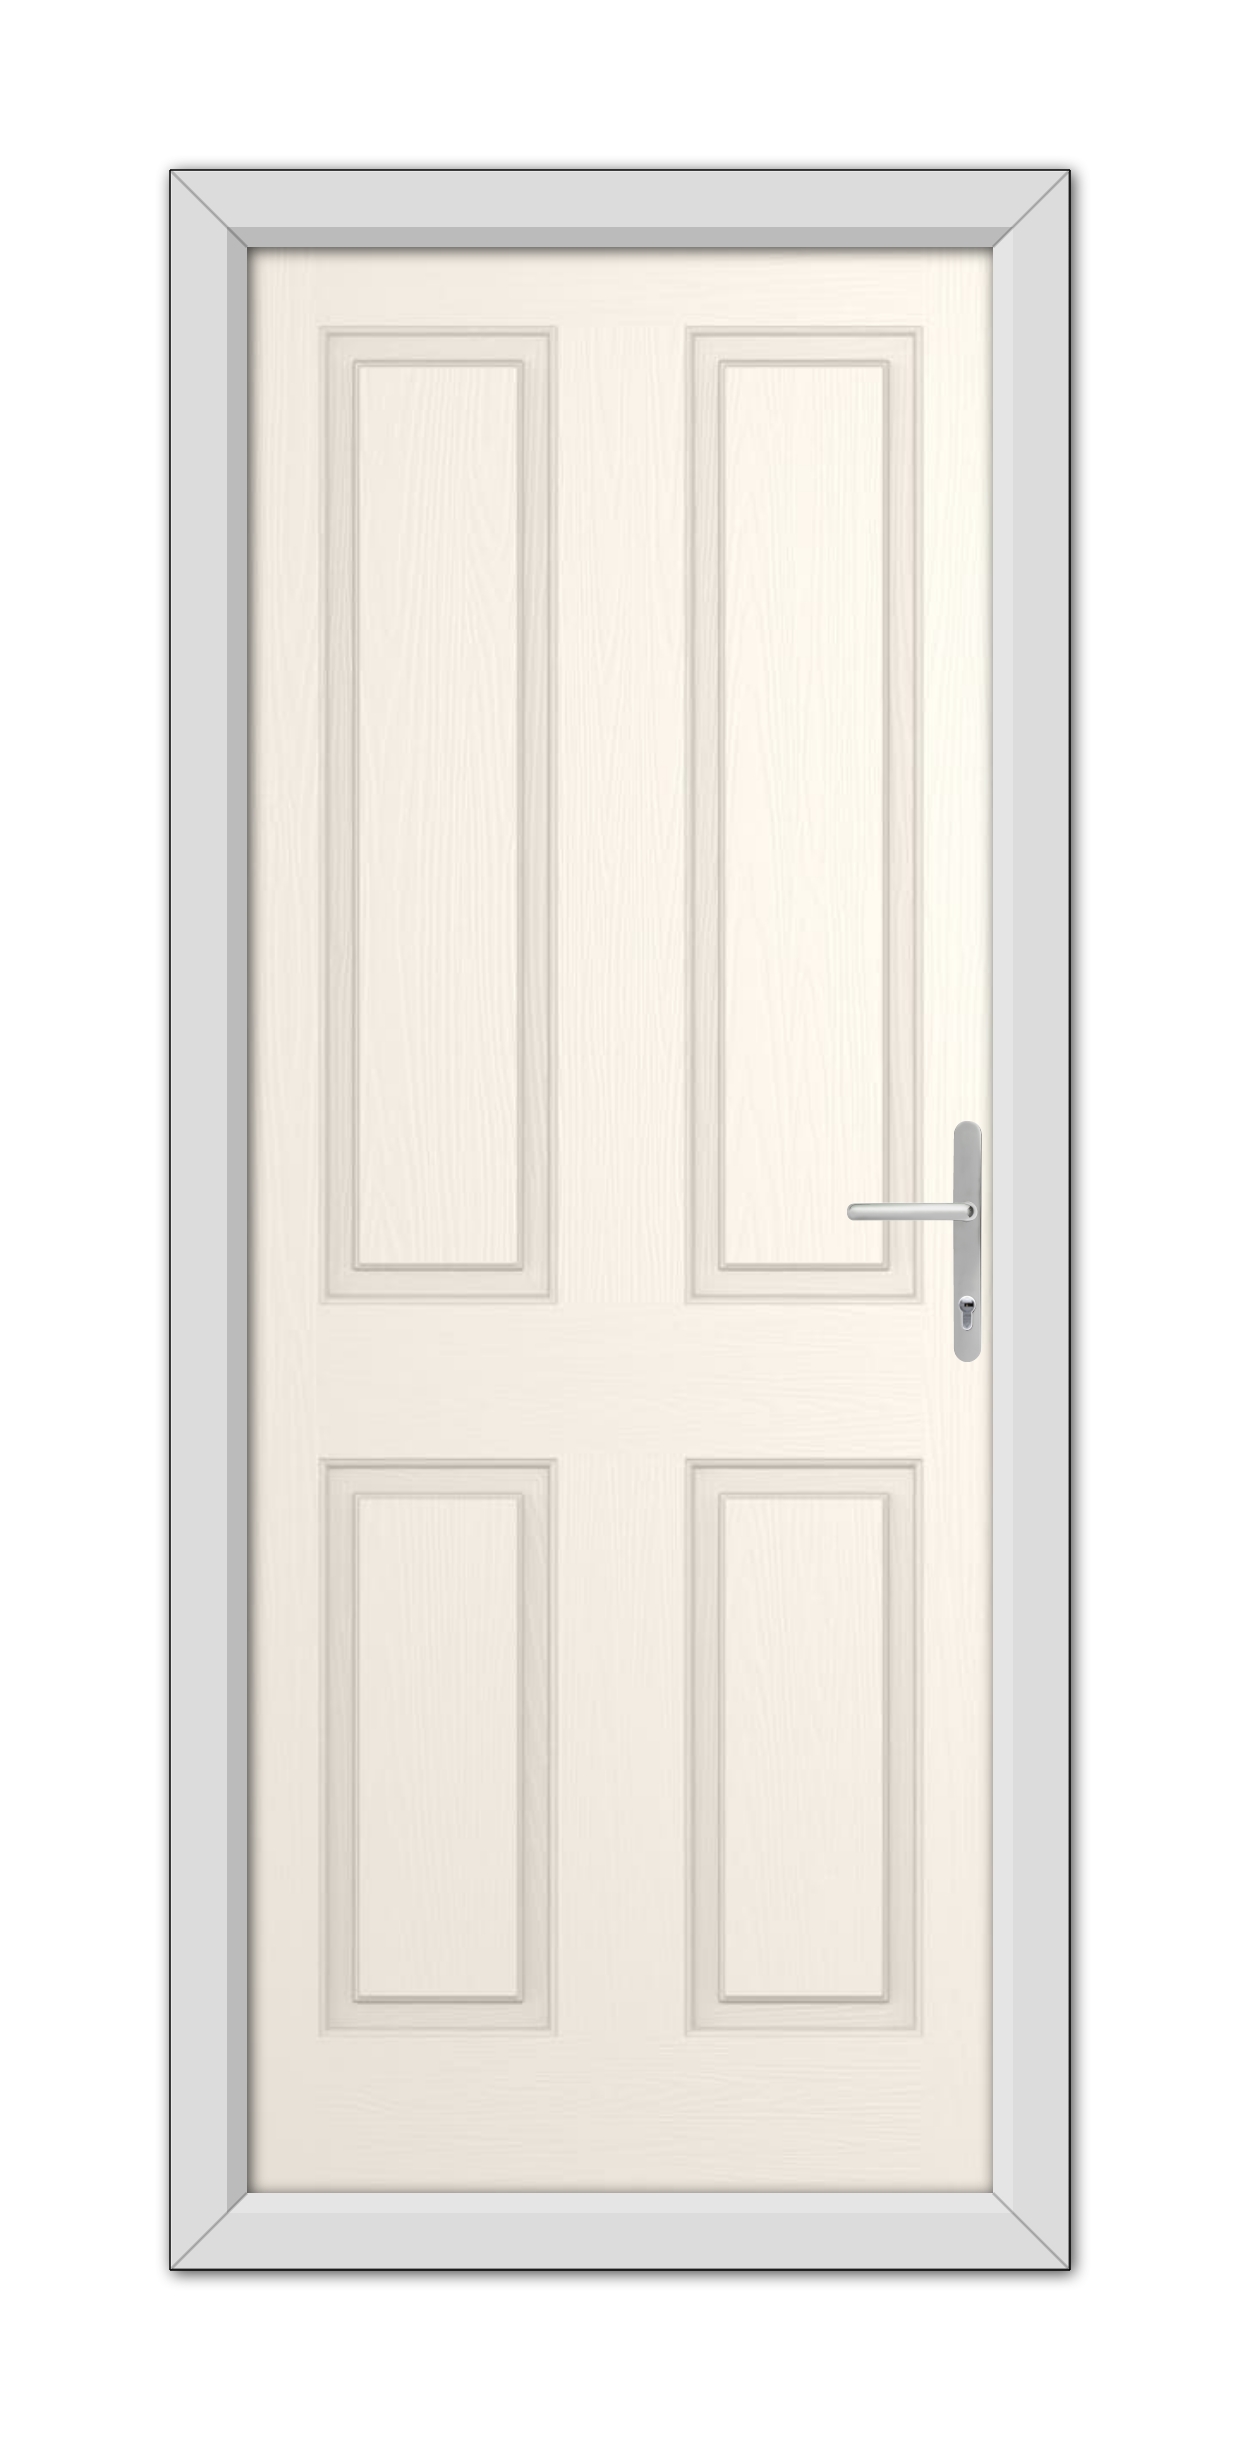 A White Foil Whitmore Solid Composite Door 48mm Timber Core with a metal handle, set within a simple frame, viewed straight on.